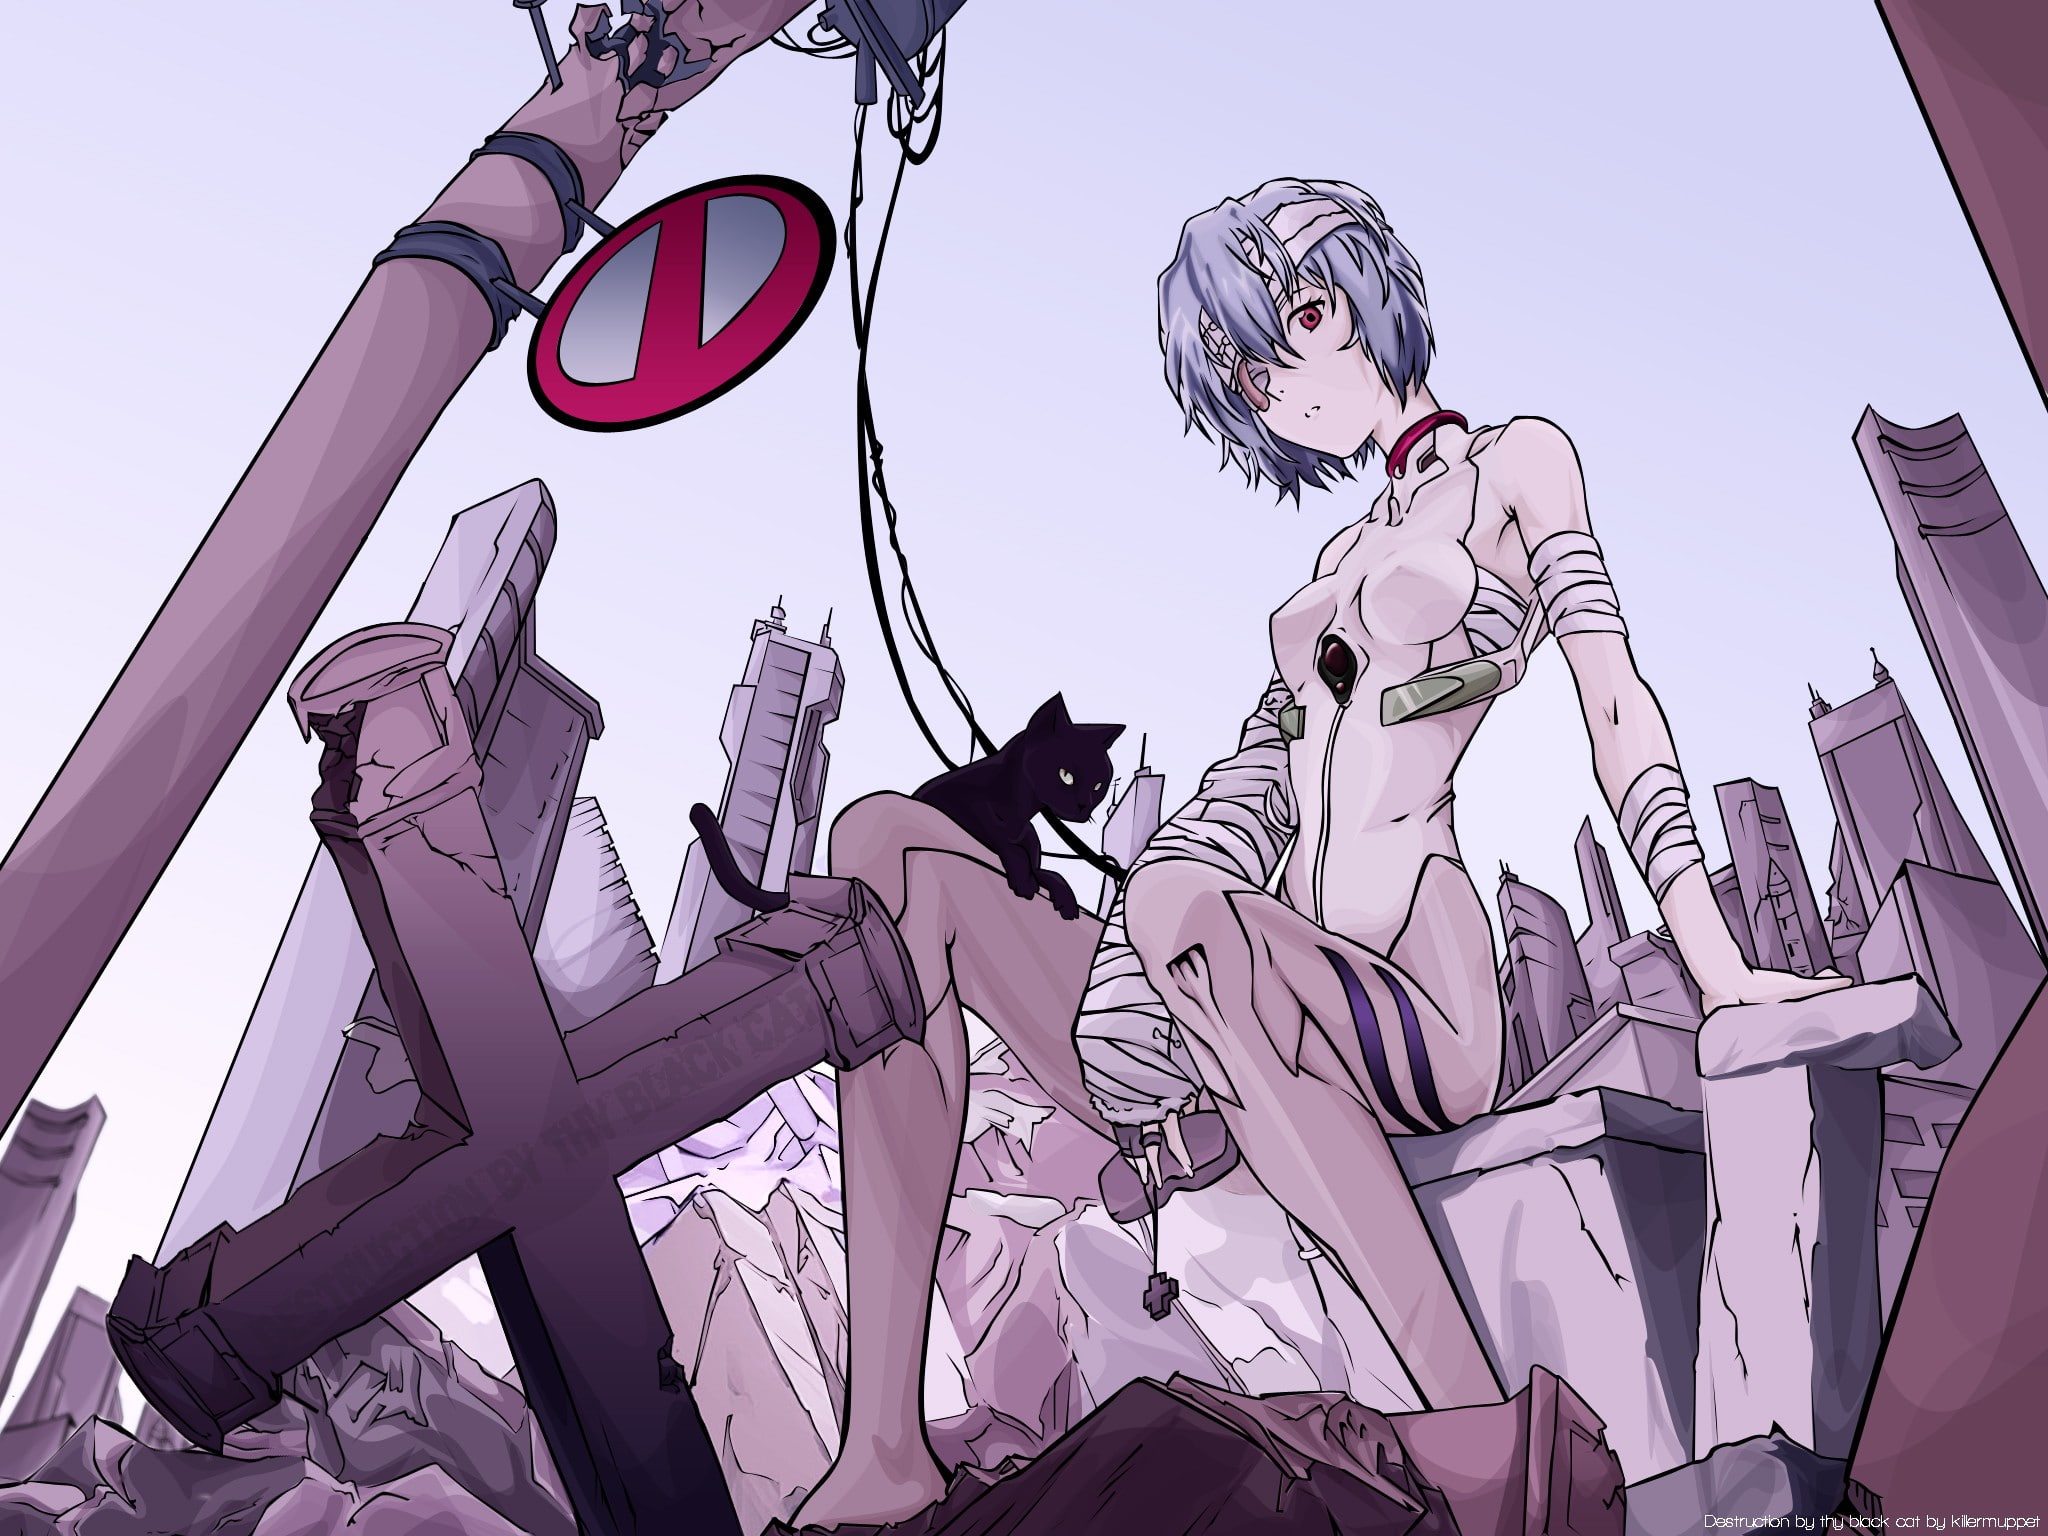 Neon Genesis Evangelion, Ayanami Rei, bandage, one person, arts culture and entertainment